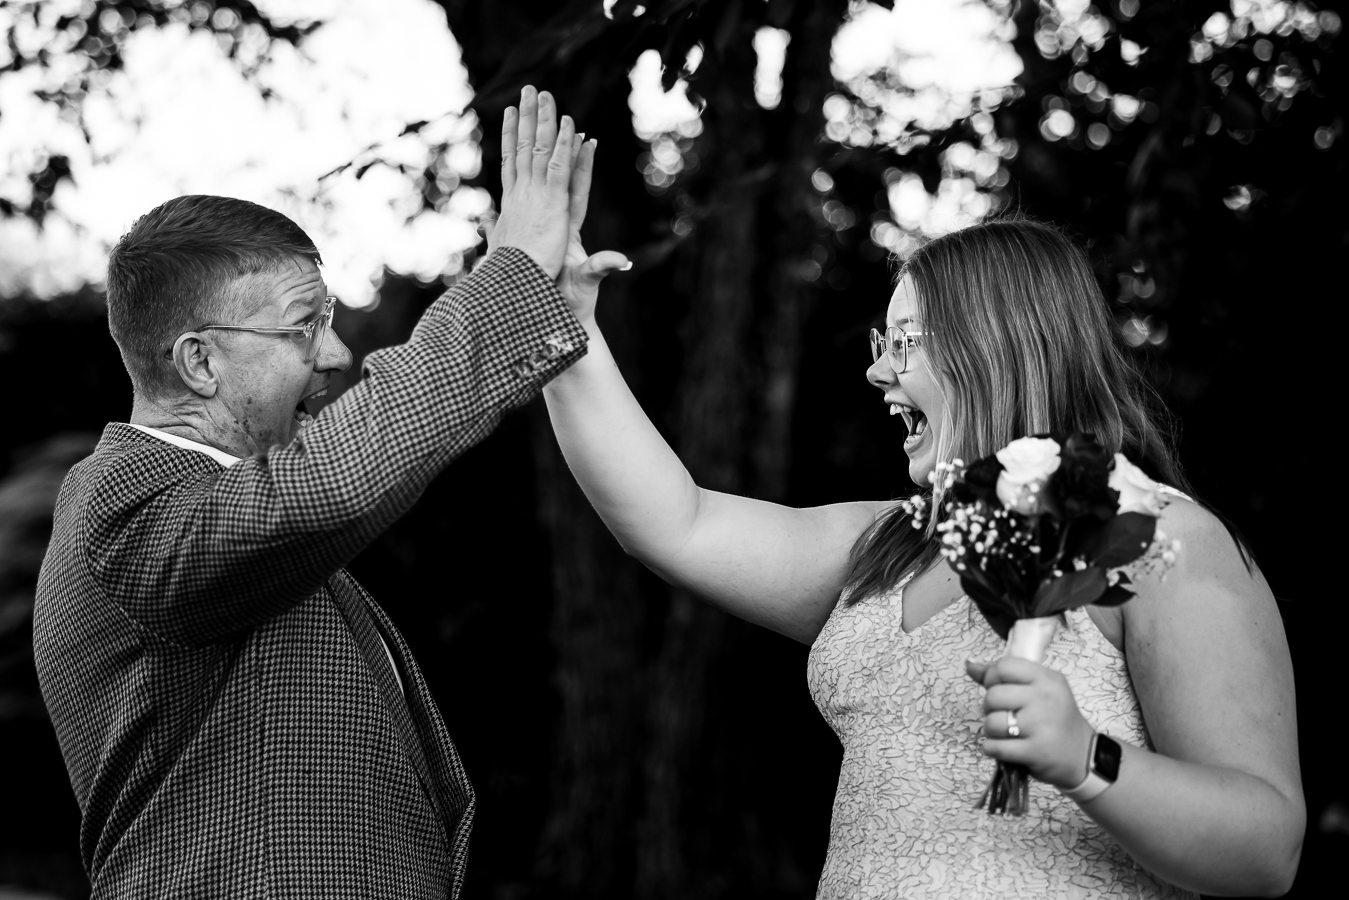 DMV wedding photographer, rhinehart photography, captures this fun, candid image of the bride and her dad high fiving during her intimate wedding ceremony at the cedar ridge community church in spencerville Maryland 